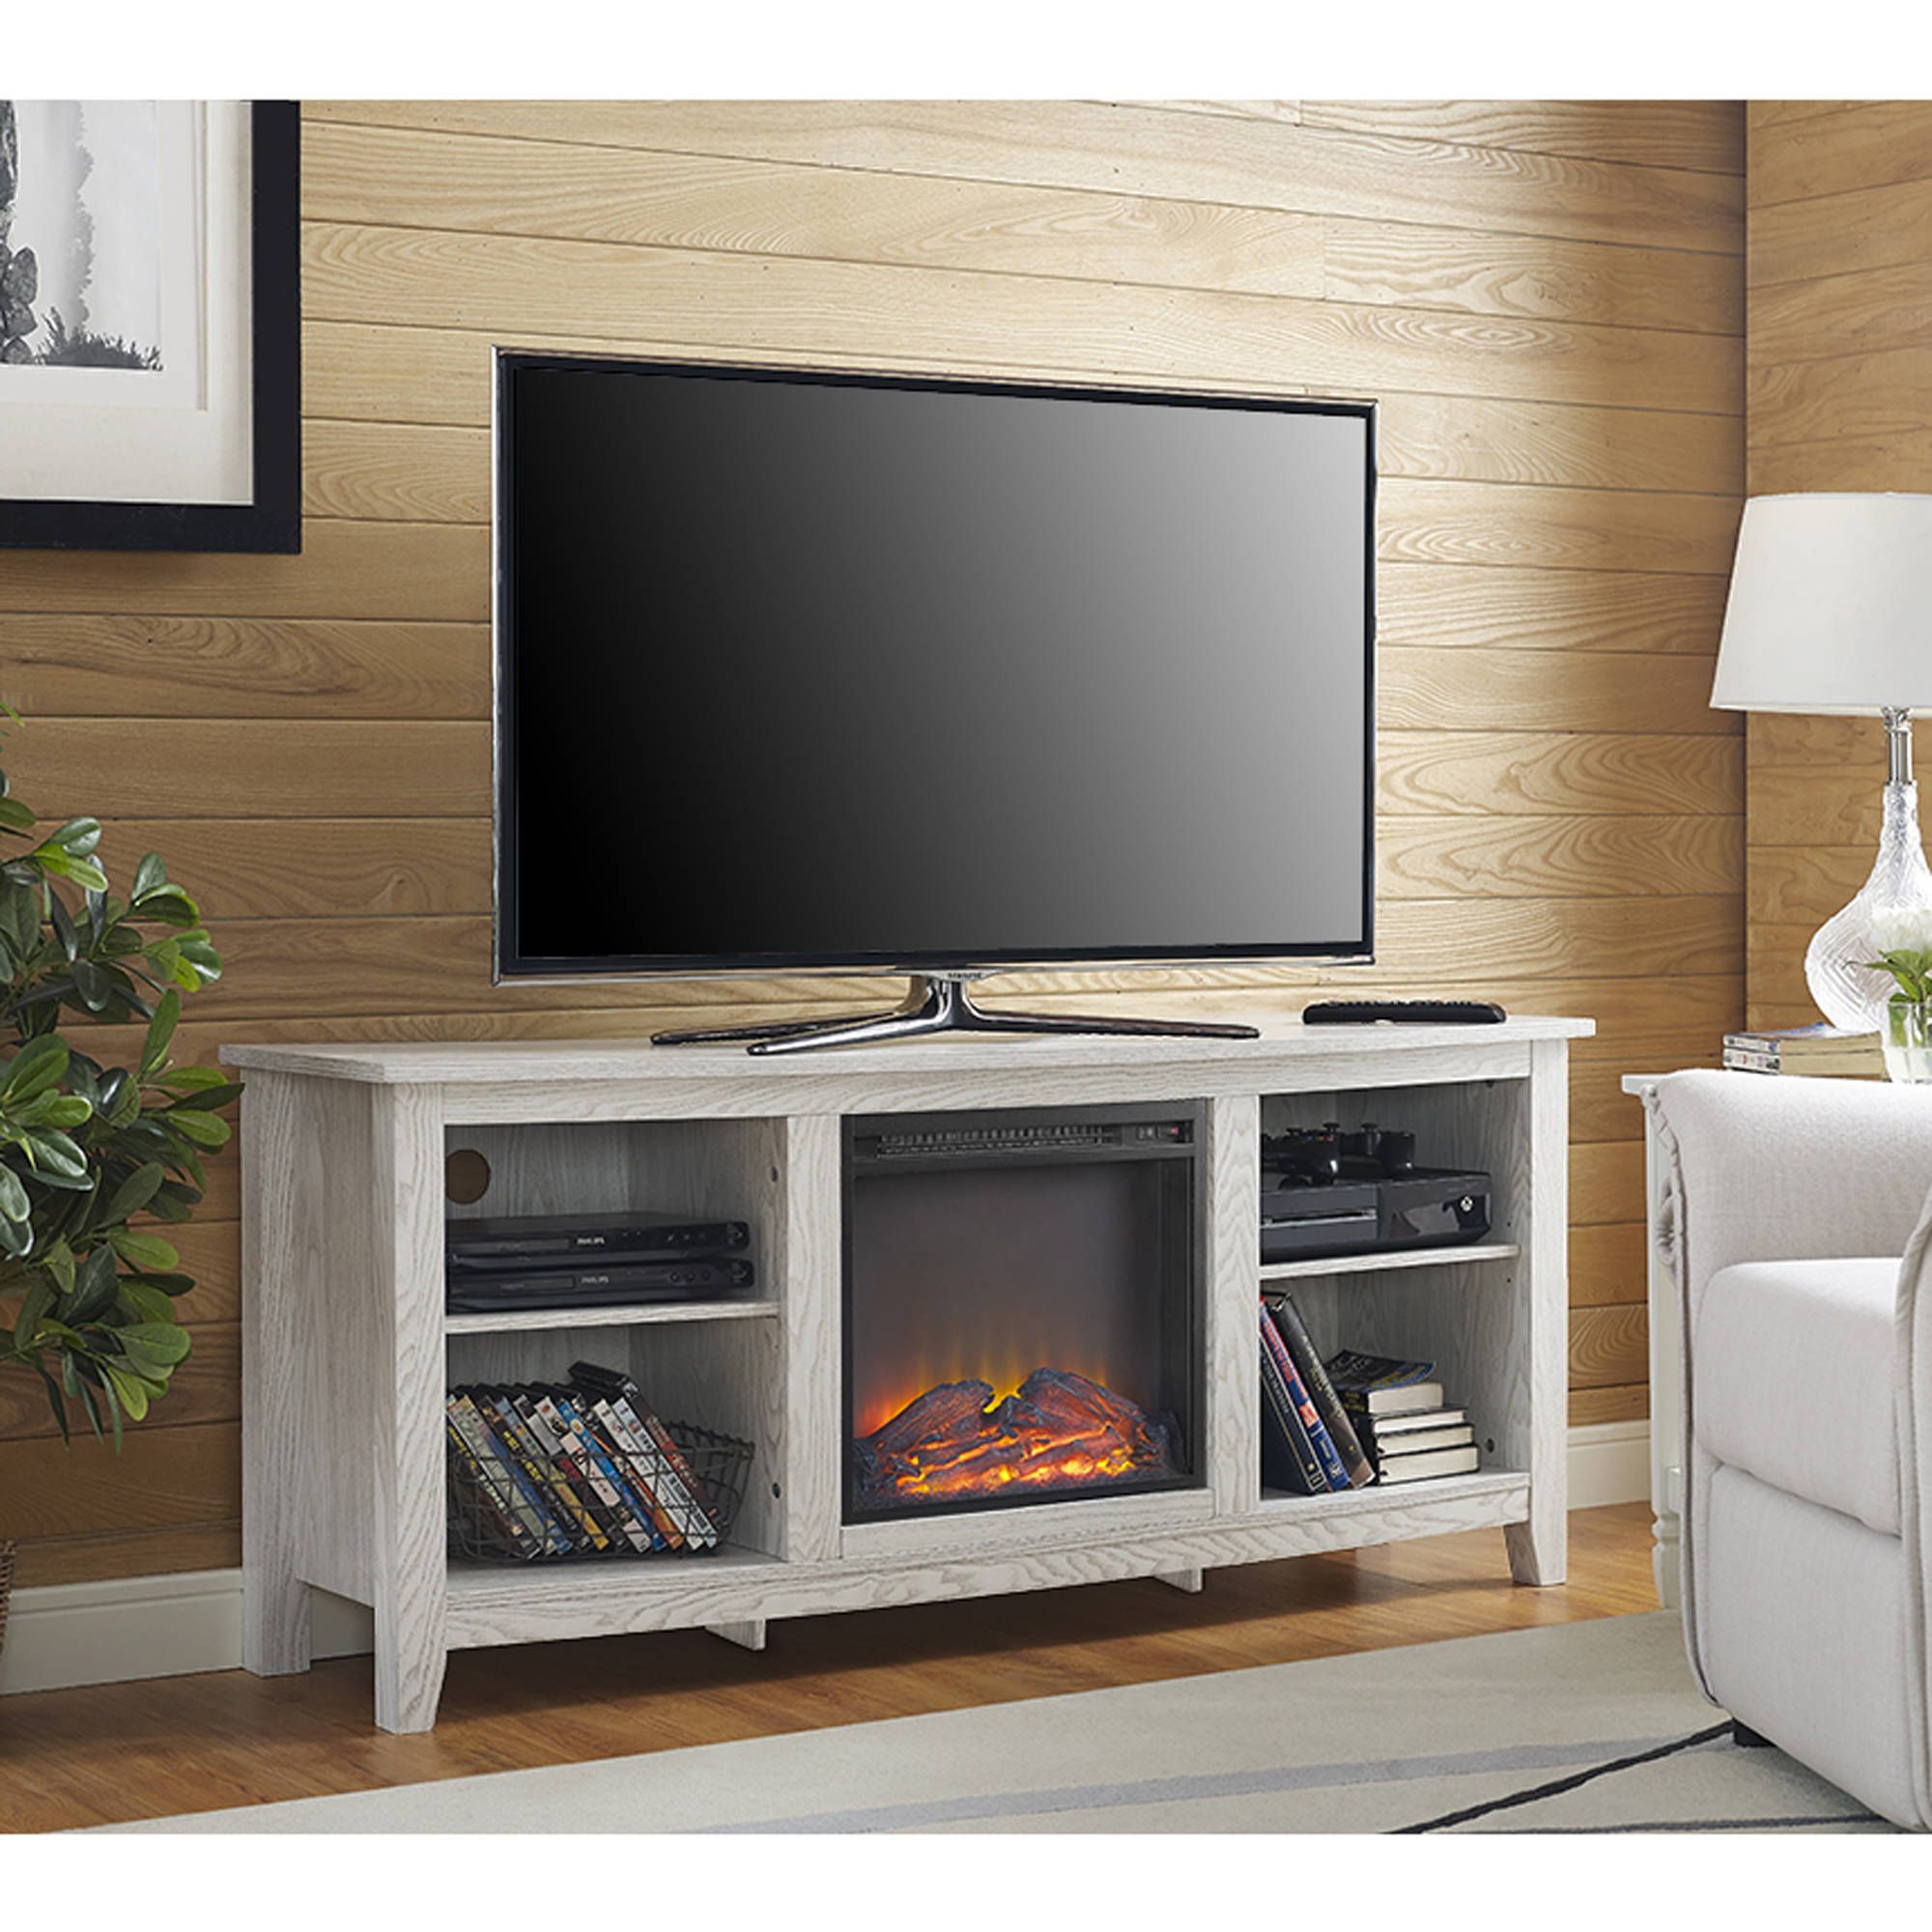 Whitewash Wood Fireplace Tv Stand For Tvs Up To 60" | Ebay In White Wood Corner Tv Stands (View 10 of 15)